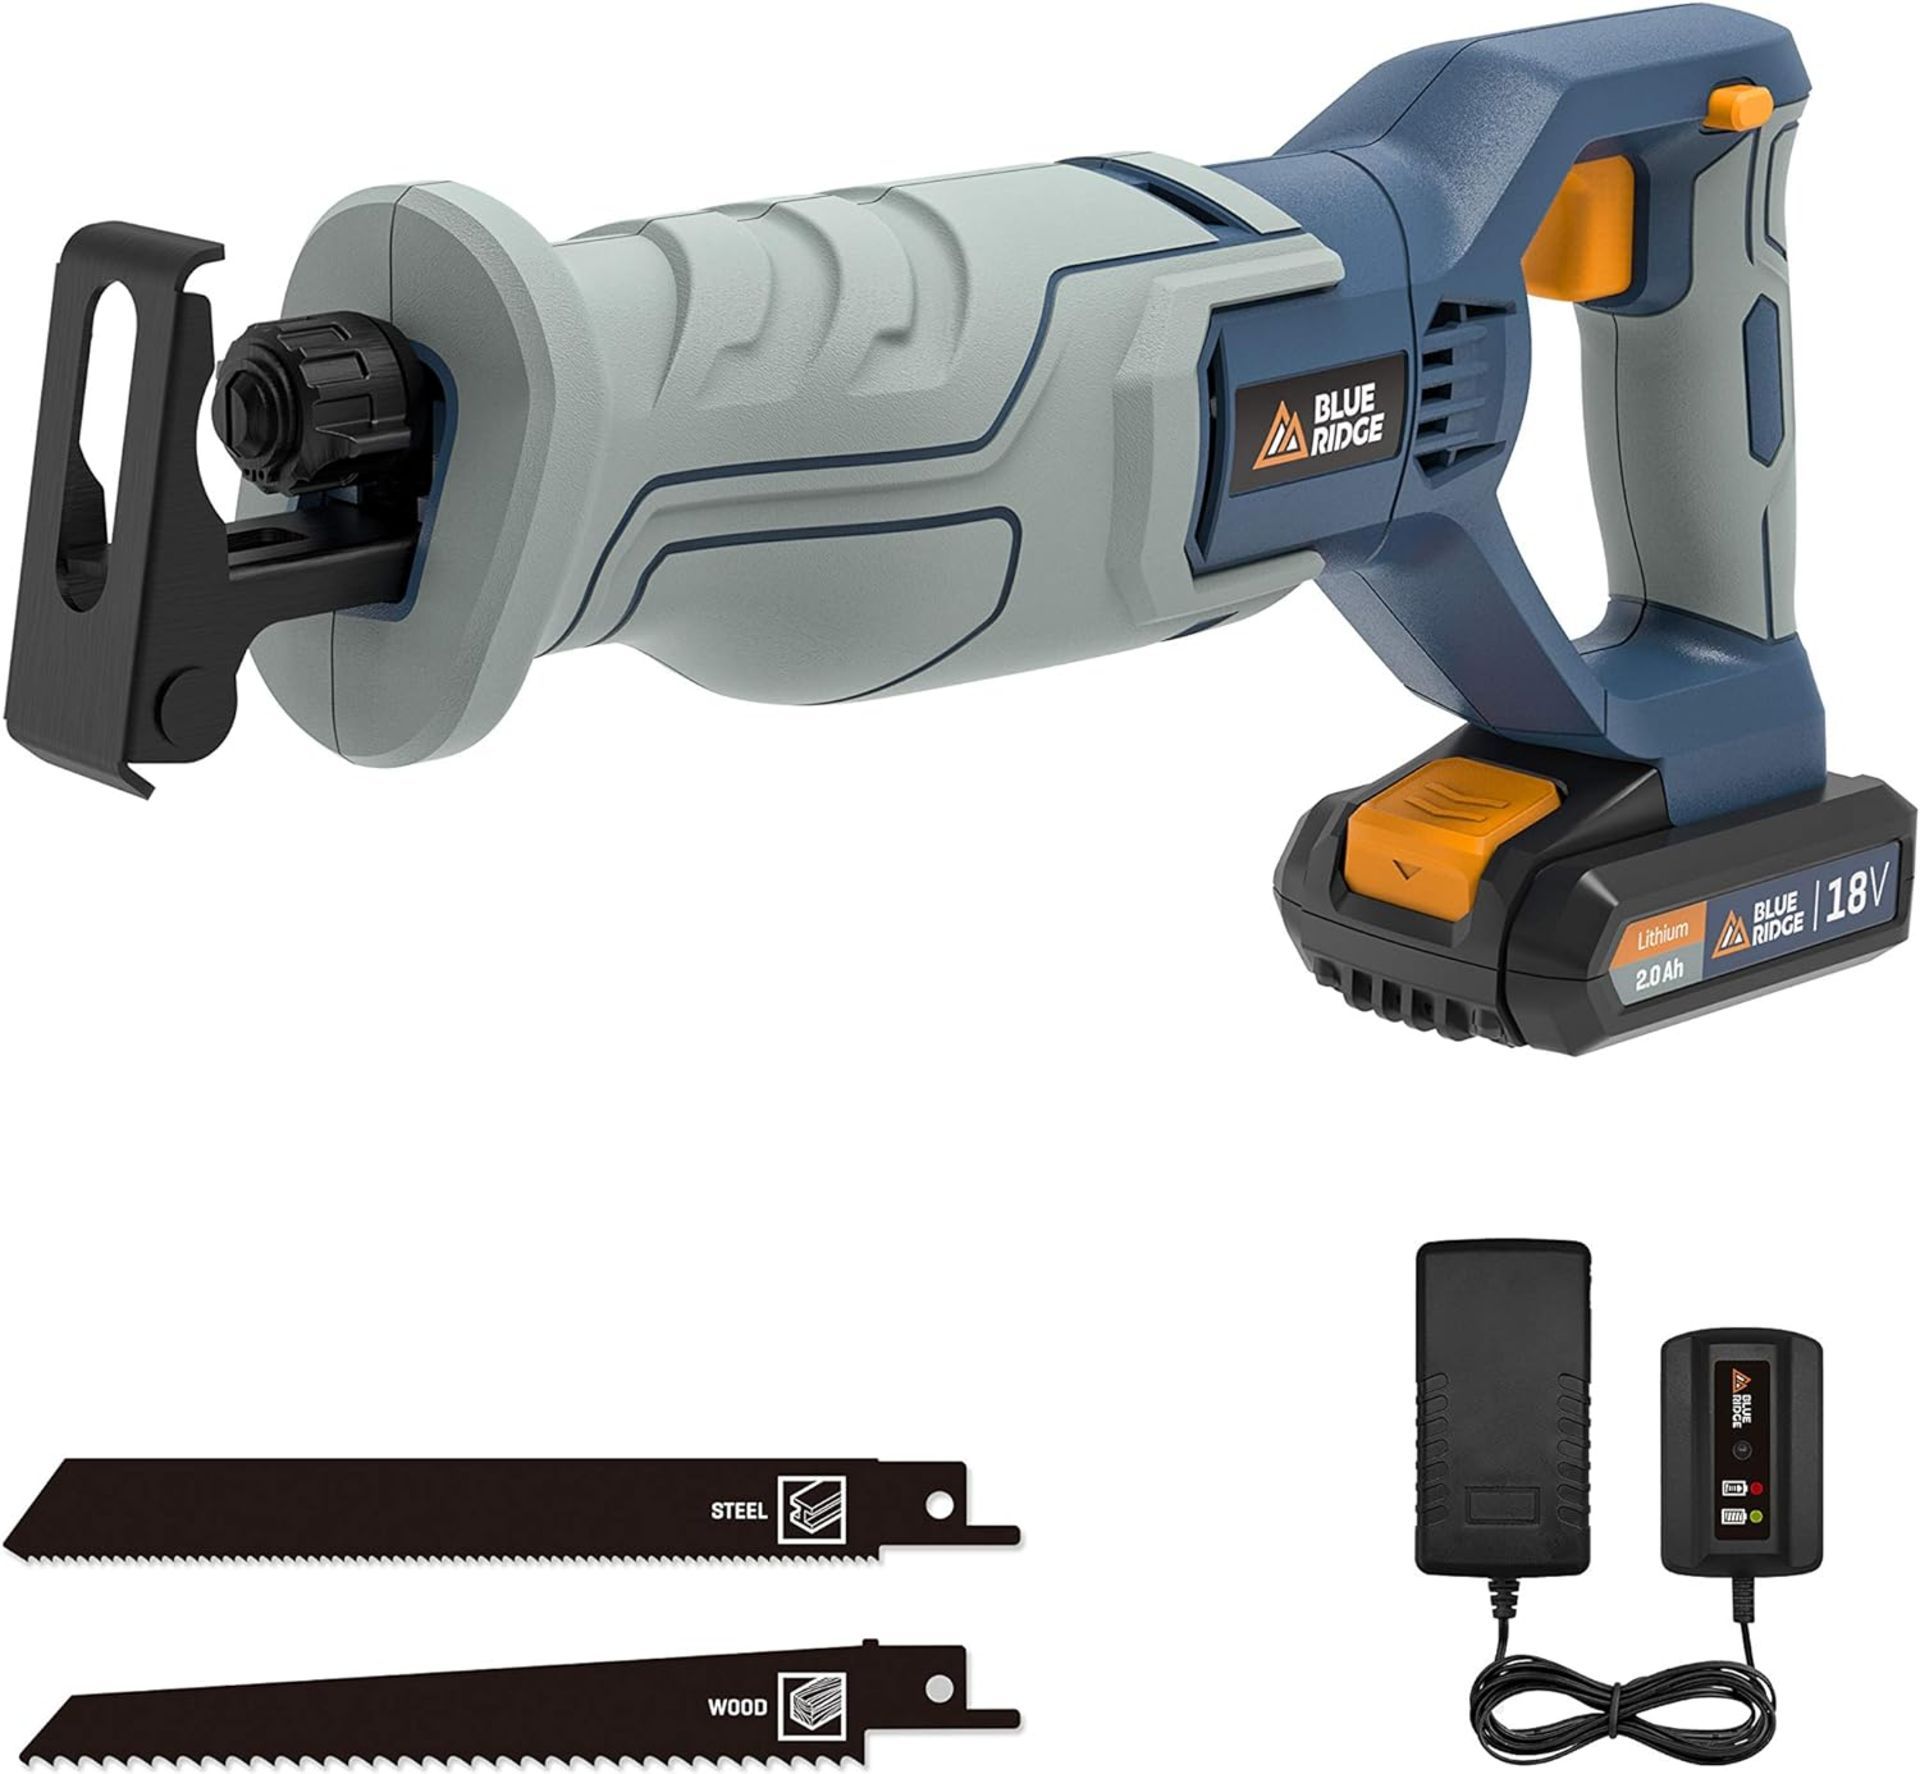 3x NEW & BOXED BLUE RIDGE 18V Reciprocating Cordless Sabre Saw with 2.0Ah Battery. RRP £99 EACH. - Bild 2 aus 8